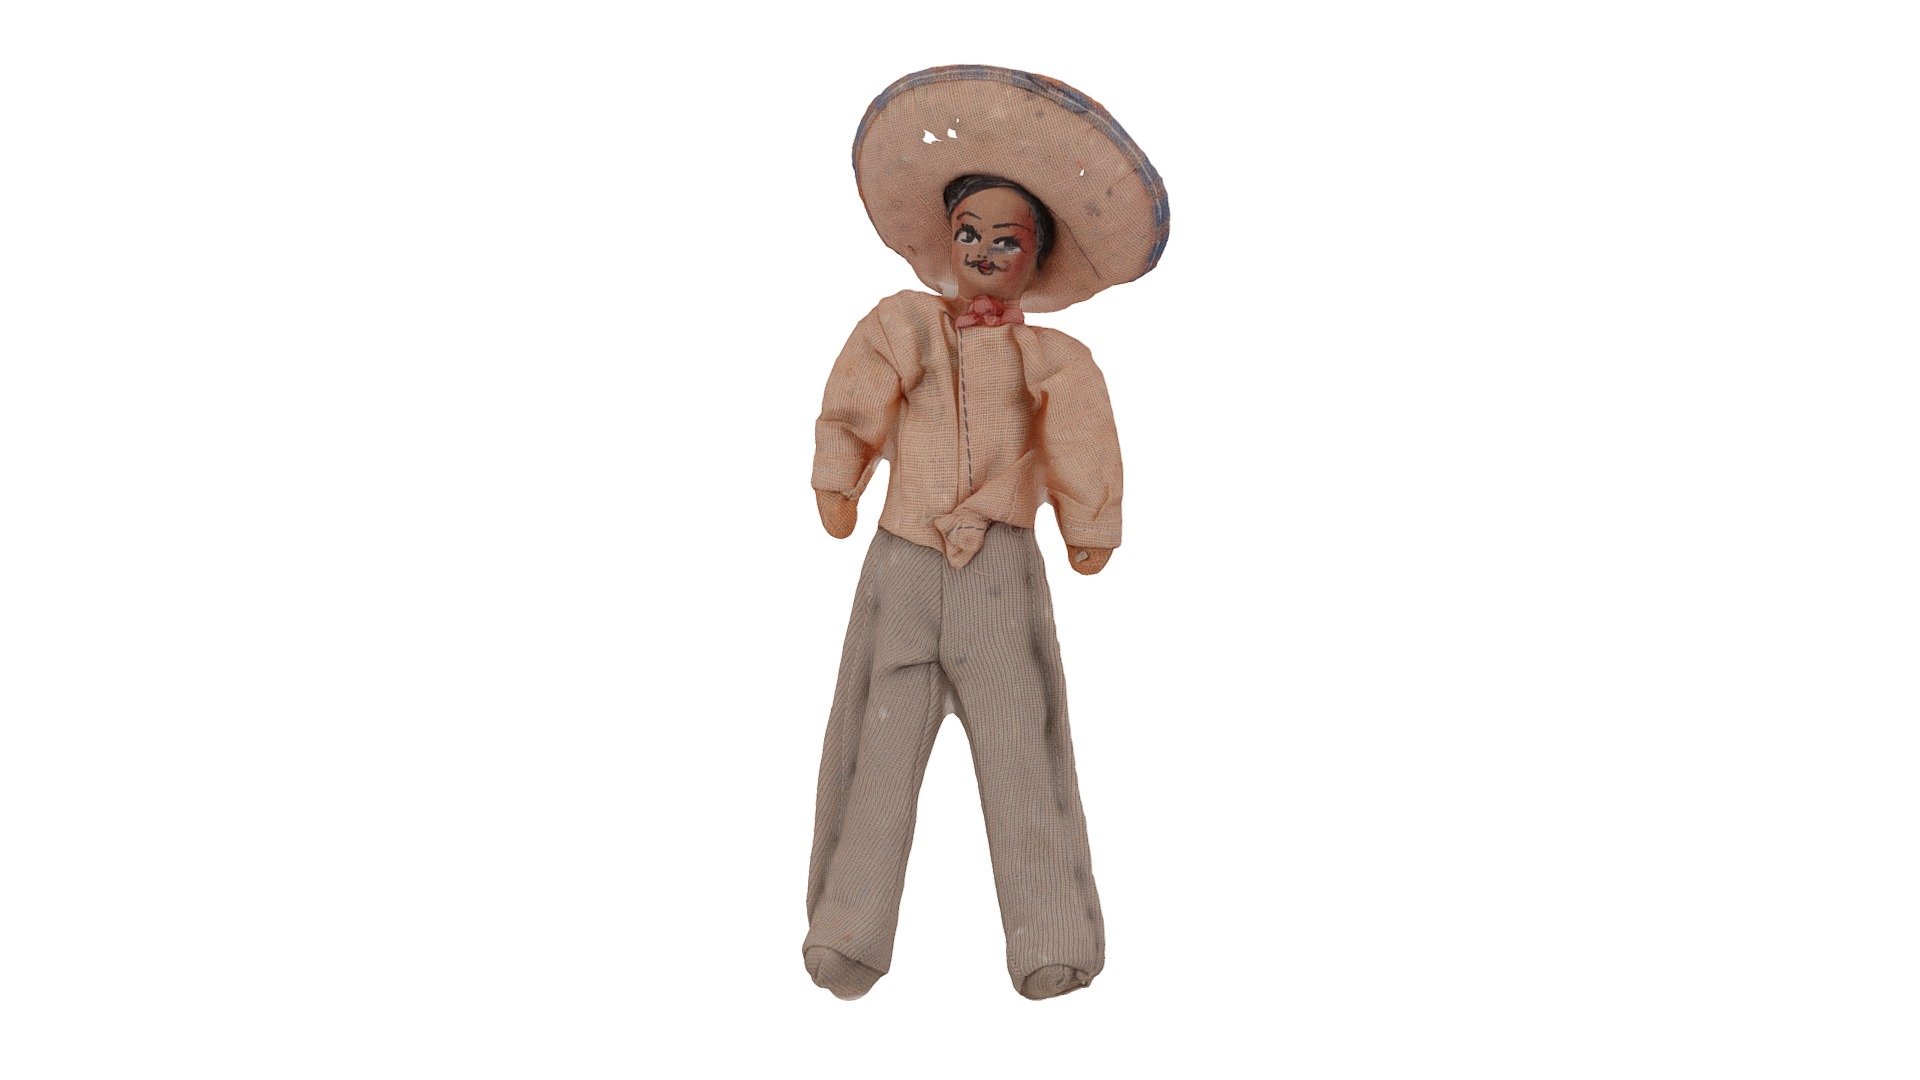 Archival Museum Objects. 1960's Mexican toy.